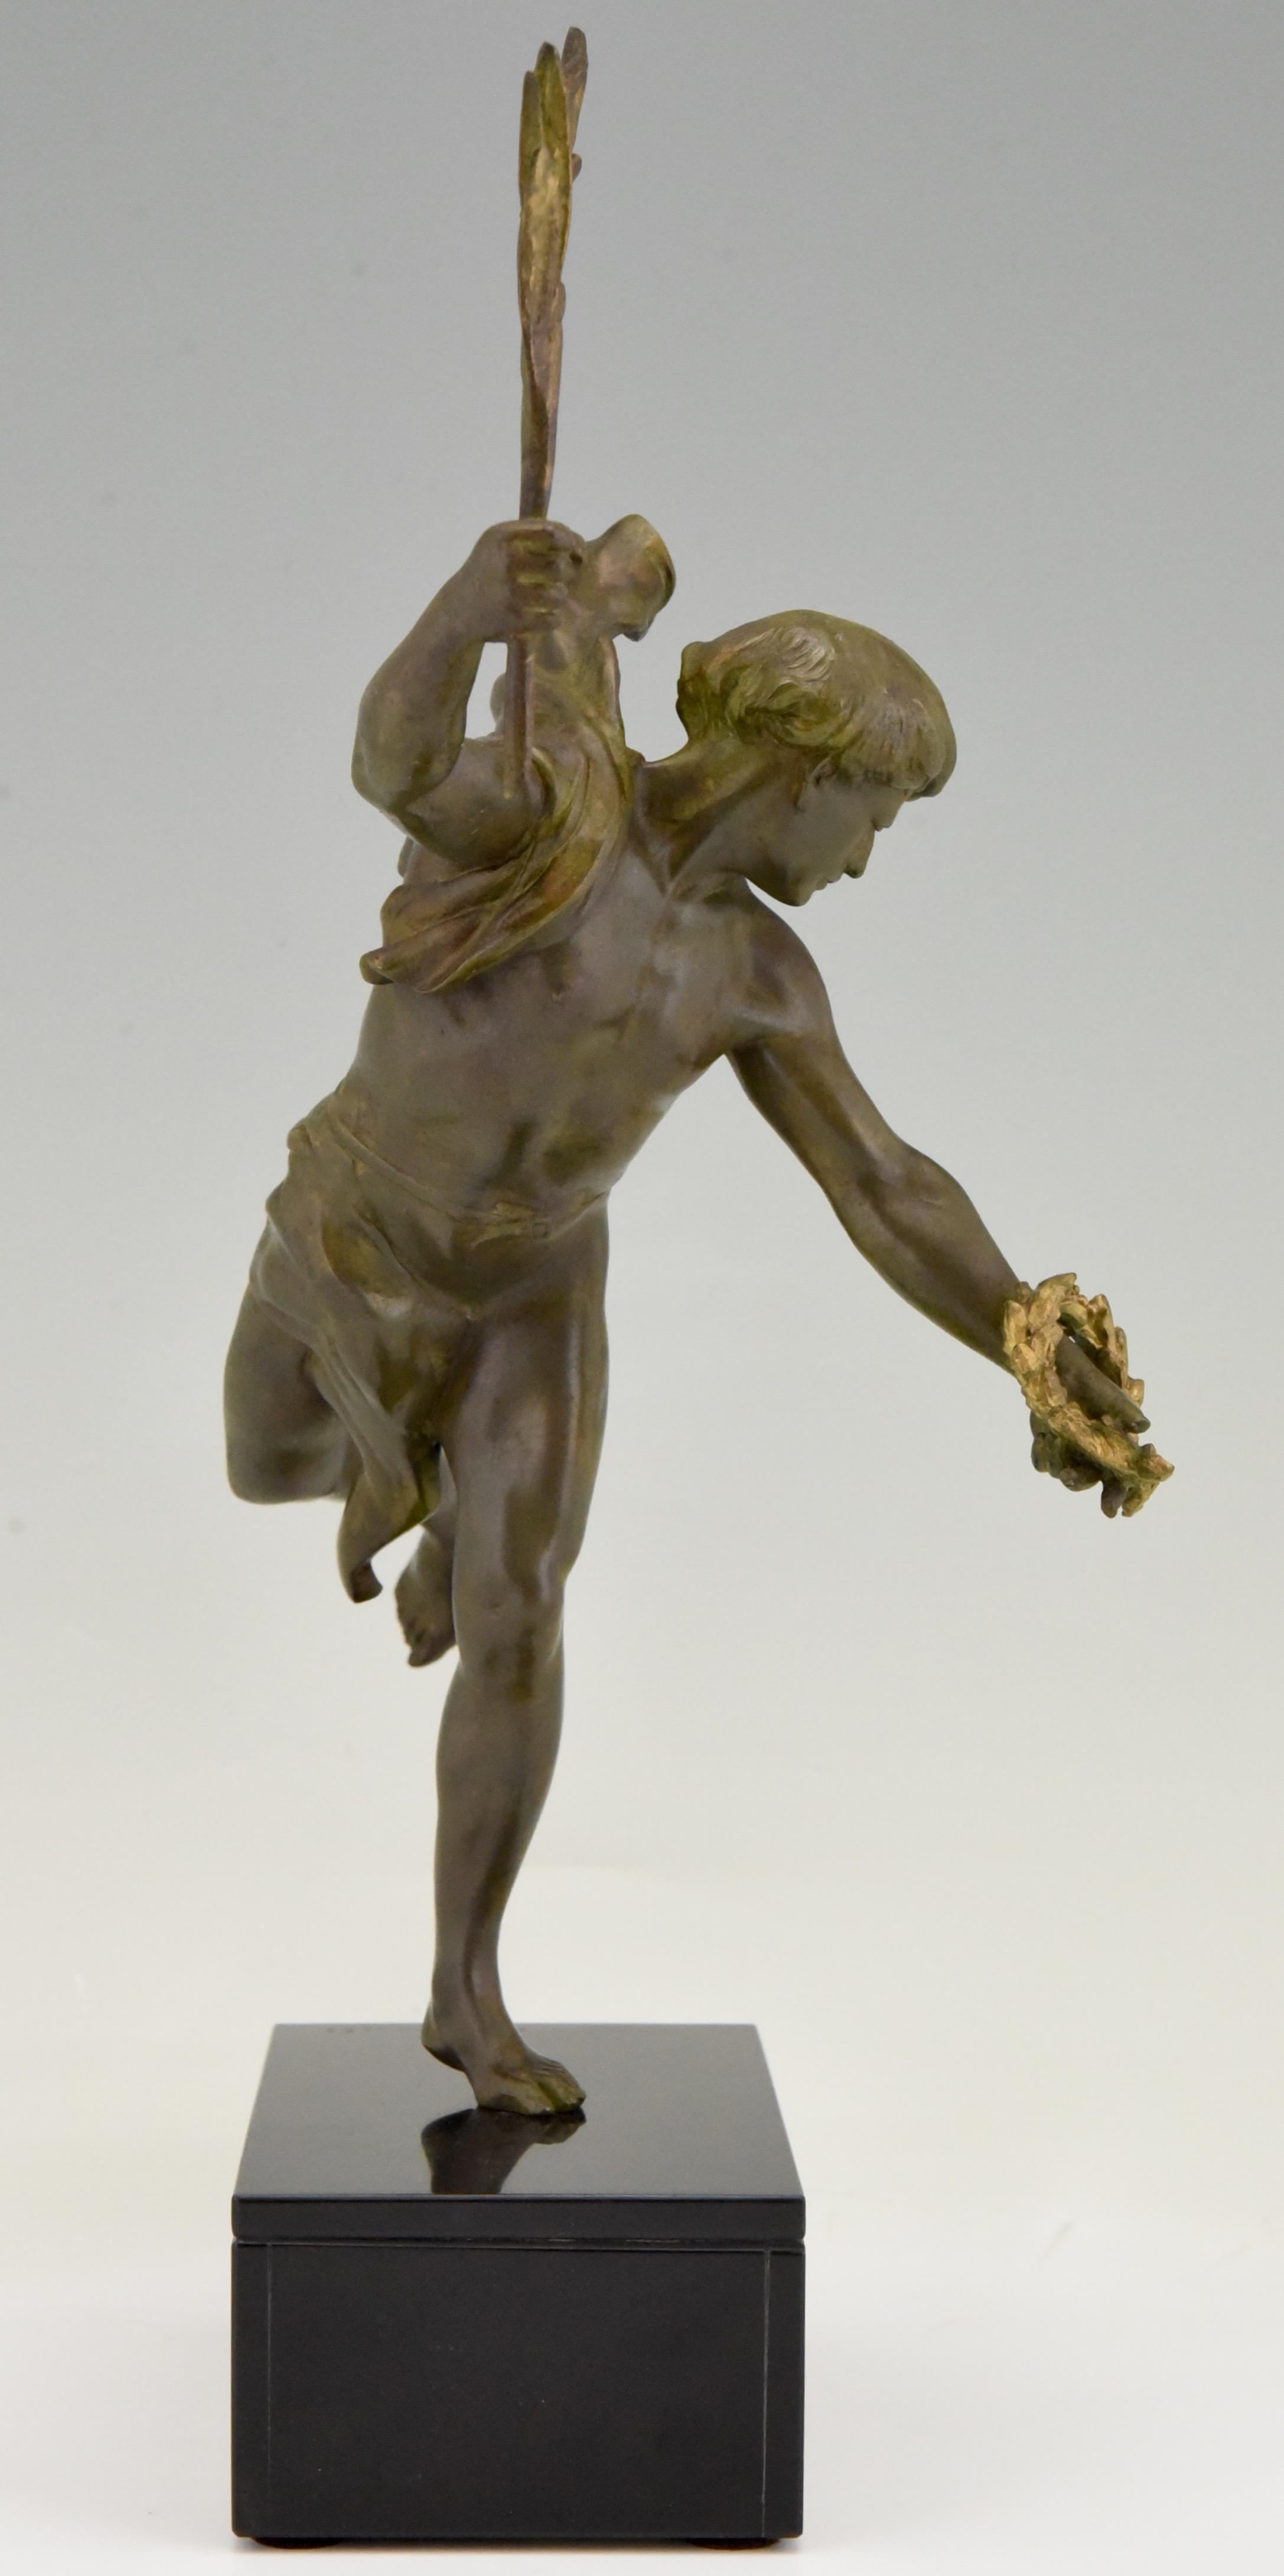 French Antique Sculpture of a Man with Laurel Branch by E. Picault ca. 1900